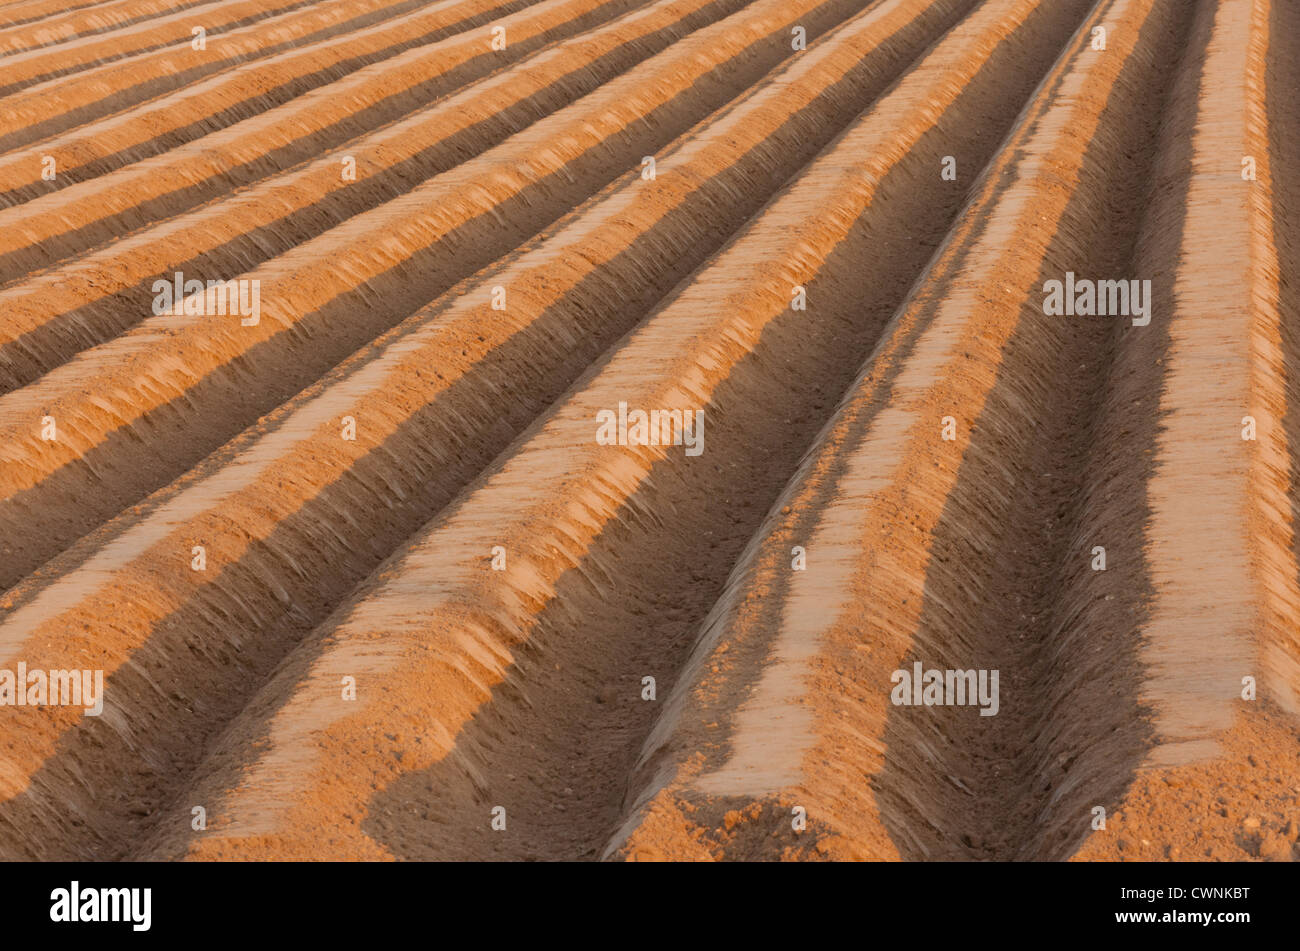 Rows of soil formed into raised lines, in which potatoes are planted Stock Photo